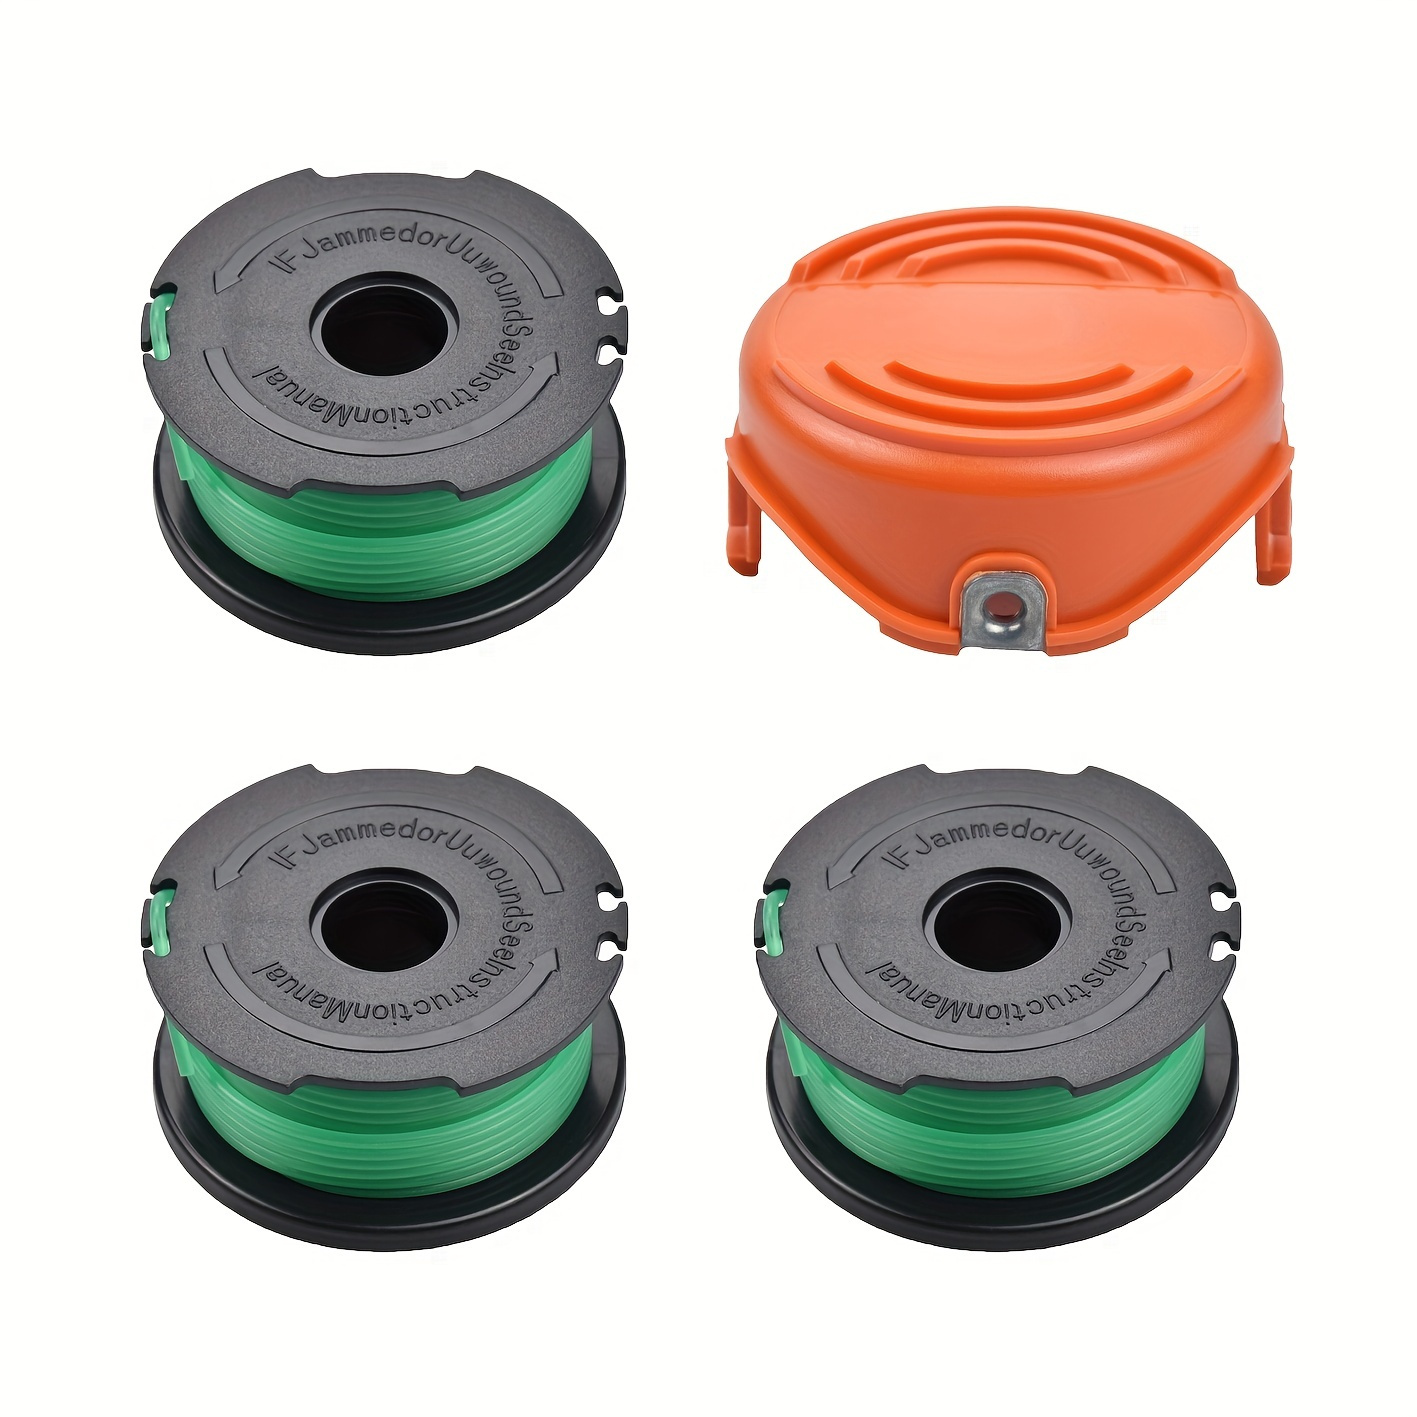 String Trimmer Spool Line Compatible With Black And Decker Sf-080-bkp Gh3000  Lst540 Gh3000r Lst540b Eater Auto Feed Single Line With 90583594 Covers  Parts - Temu